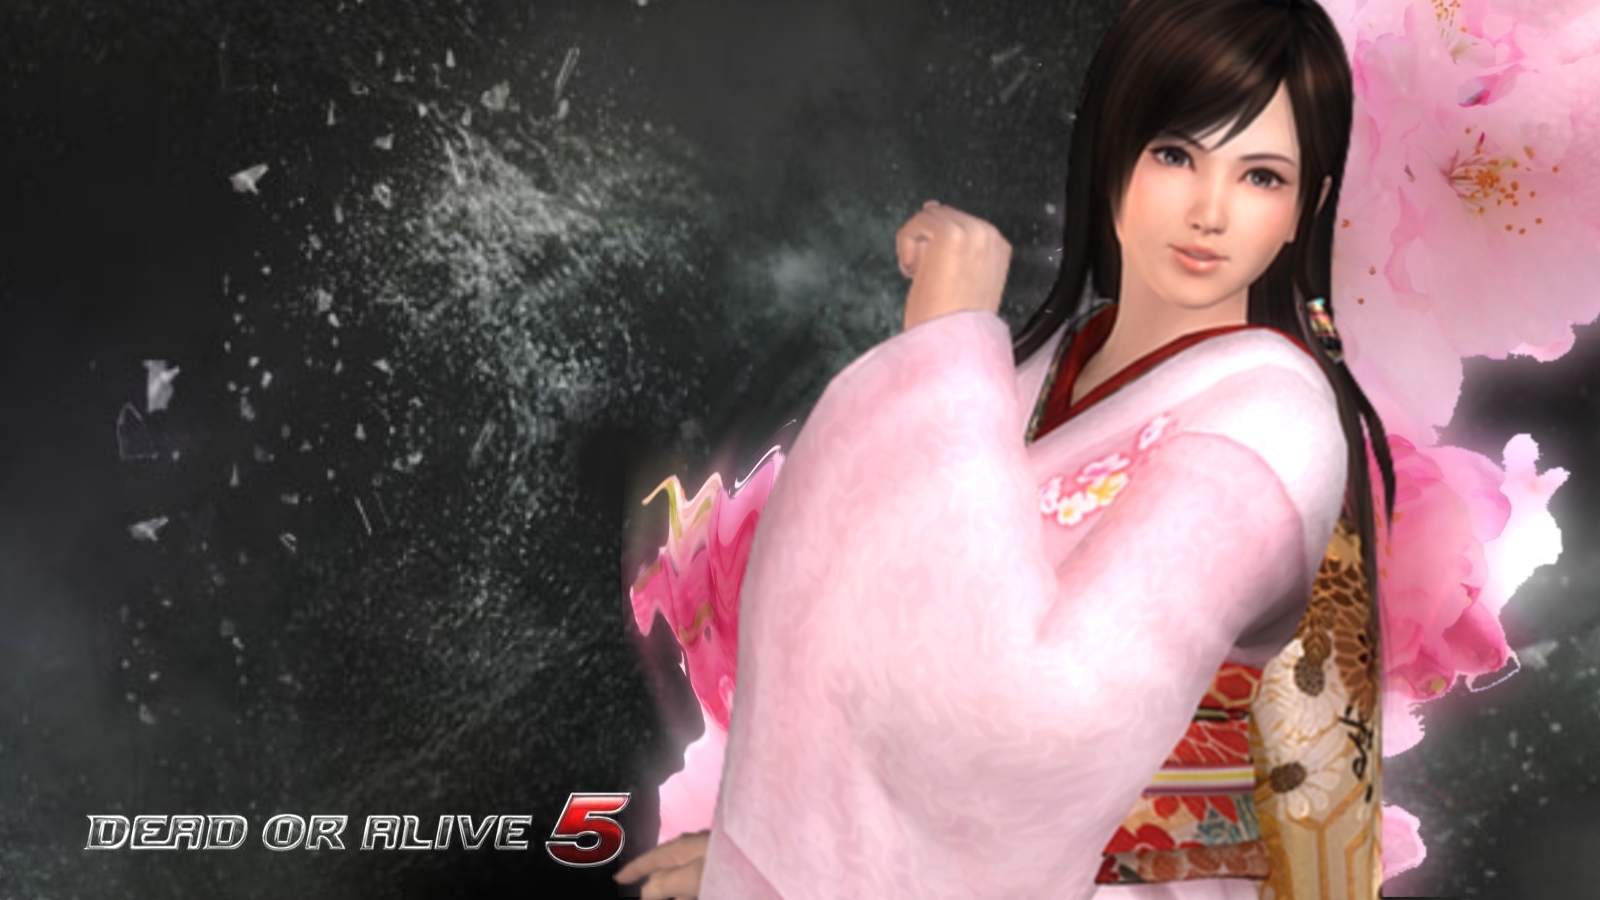 100 Dead Or Alive 5 Wallpapers On Wallpapersafari